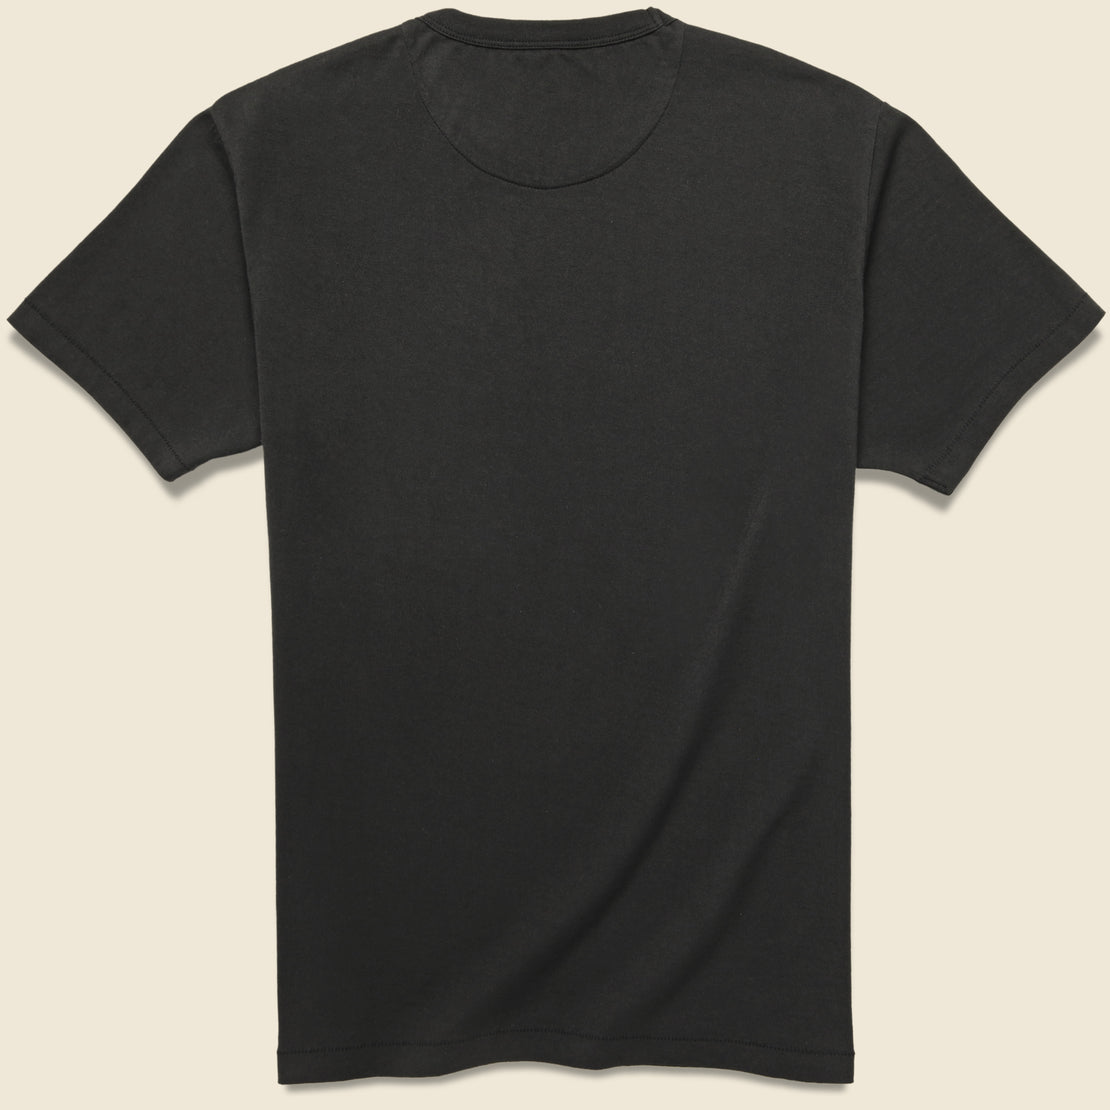 STAG Tee - Black - STAG - STAG Provisions - Tops - S/S Tee